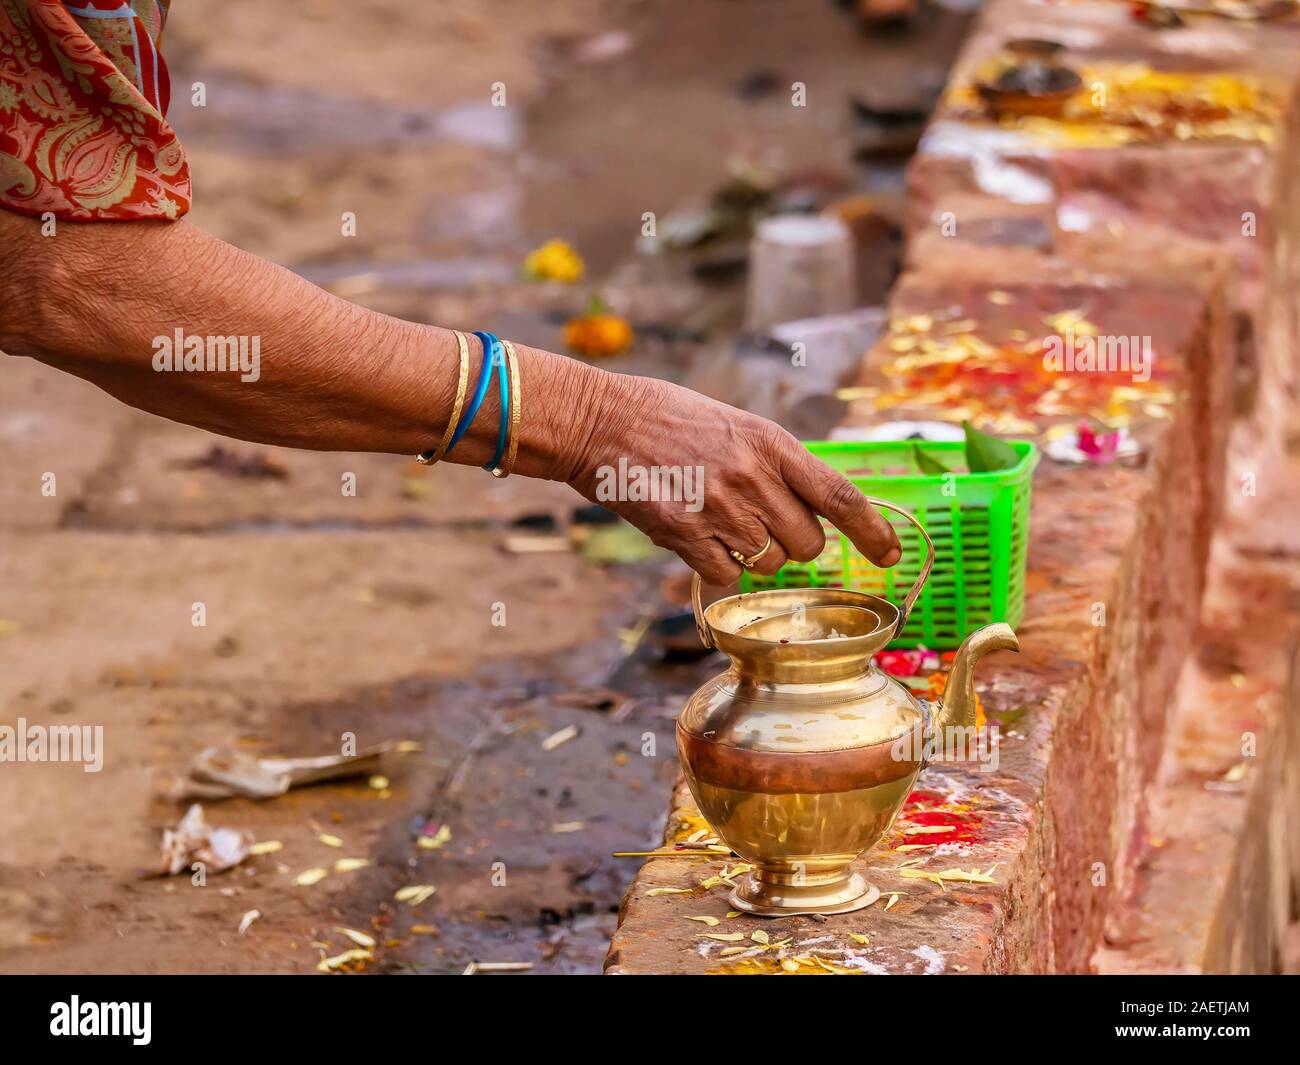 A woman prepares a personal offering to a Hindu deity using a brass pot, a basket of betel leaves and fruit, and colorful kumkum powder. Stock Photo